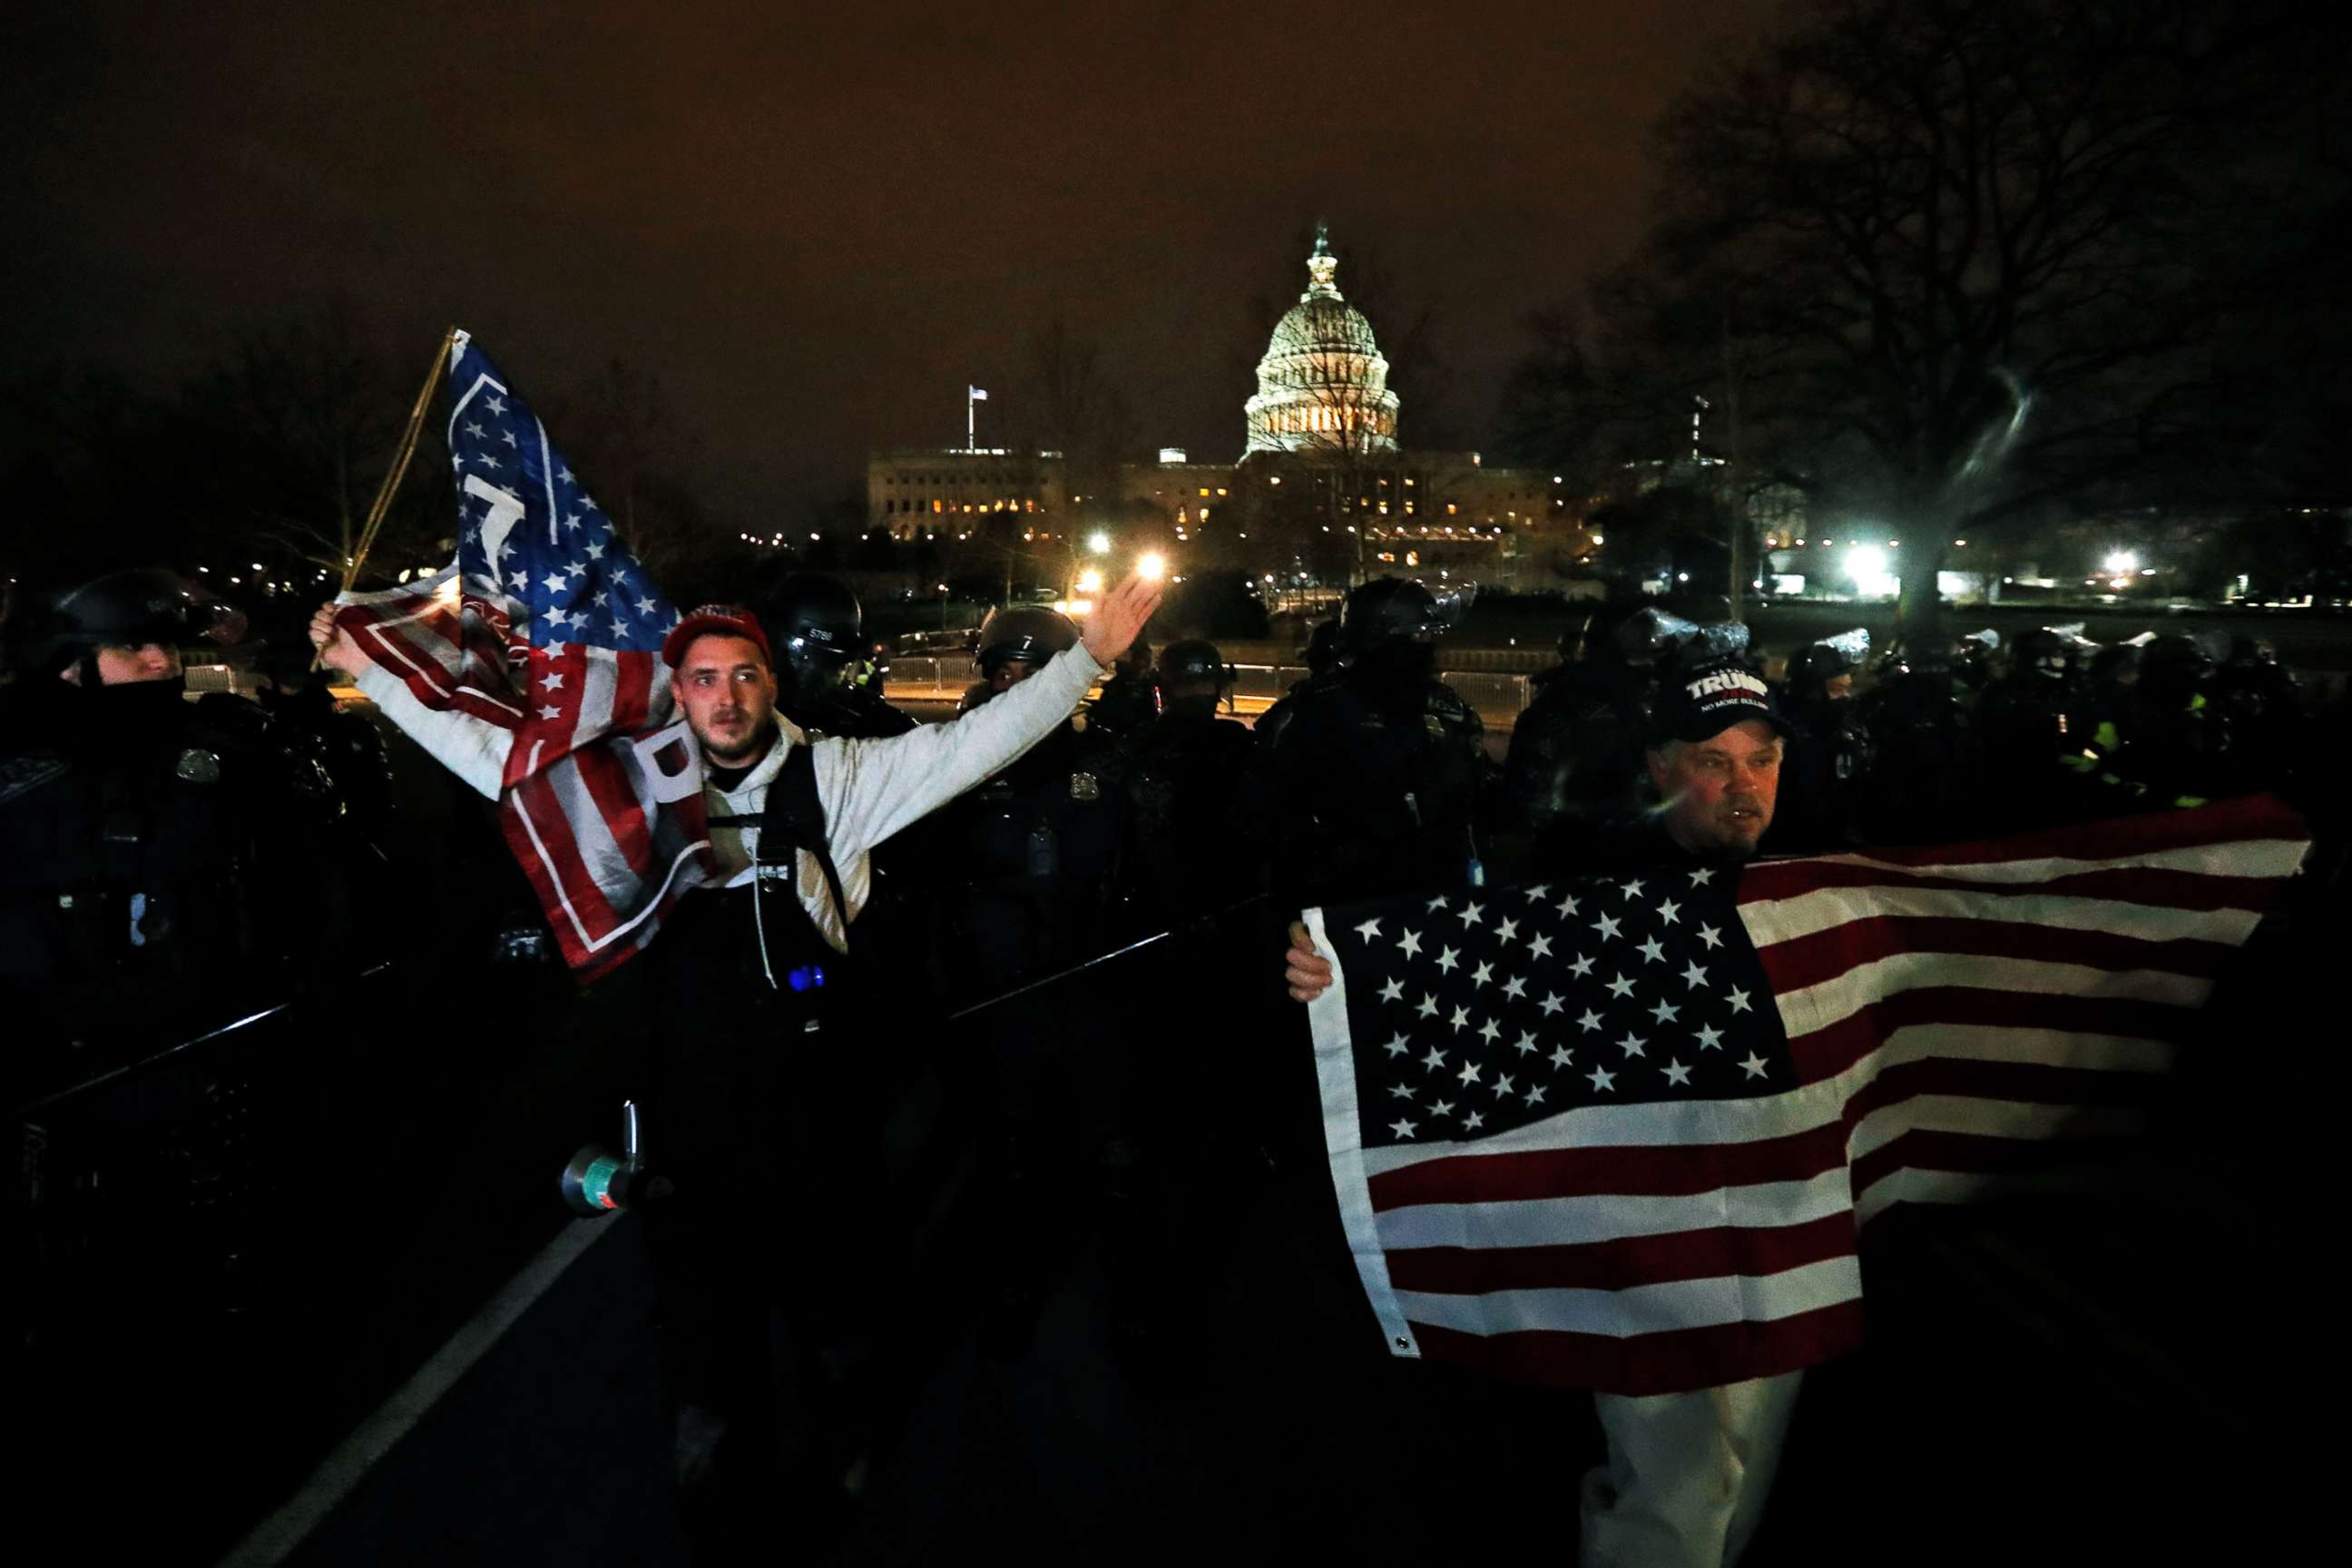 PHOTO: Supporters of President Donald Trump hold U.S. flags as they walk next to police near the Capitol during a protest against the certification of the 2020 U.S. presidential election results by the congress, Jan. 6, 2021.